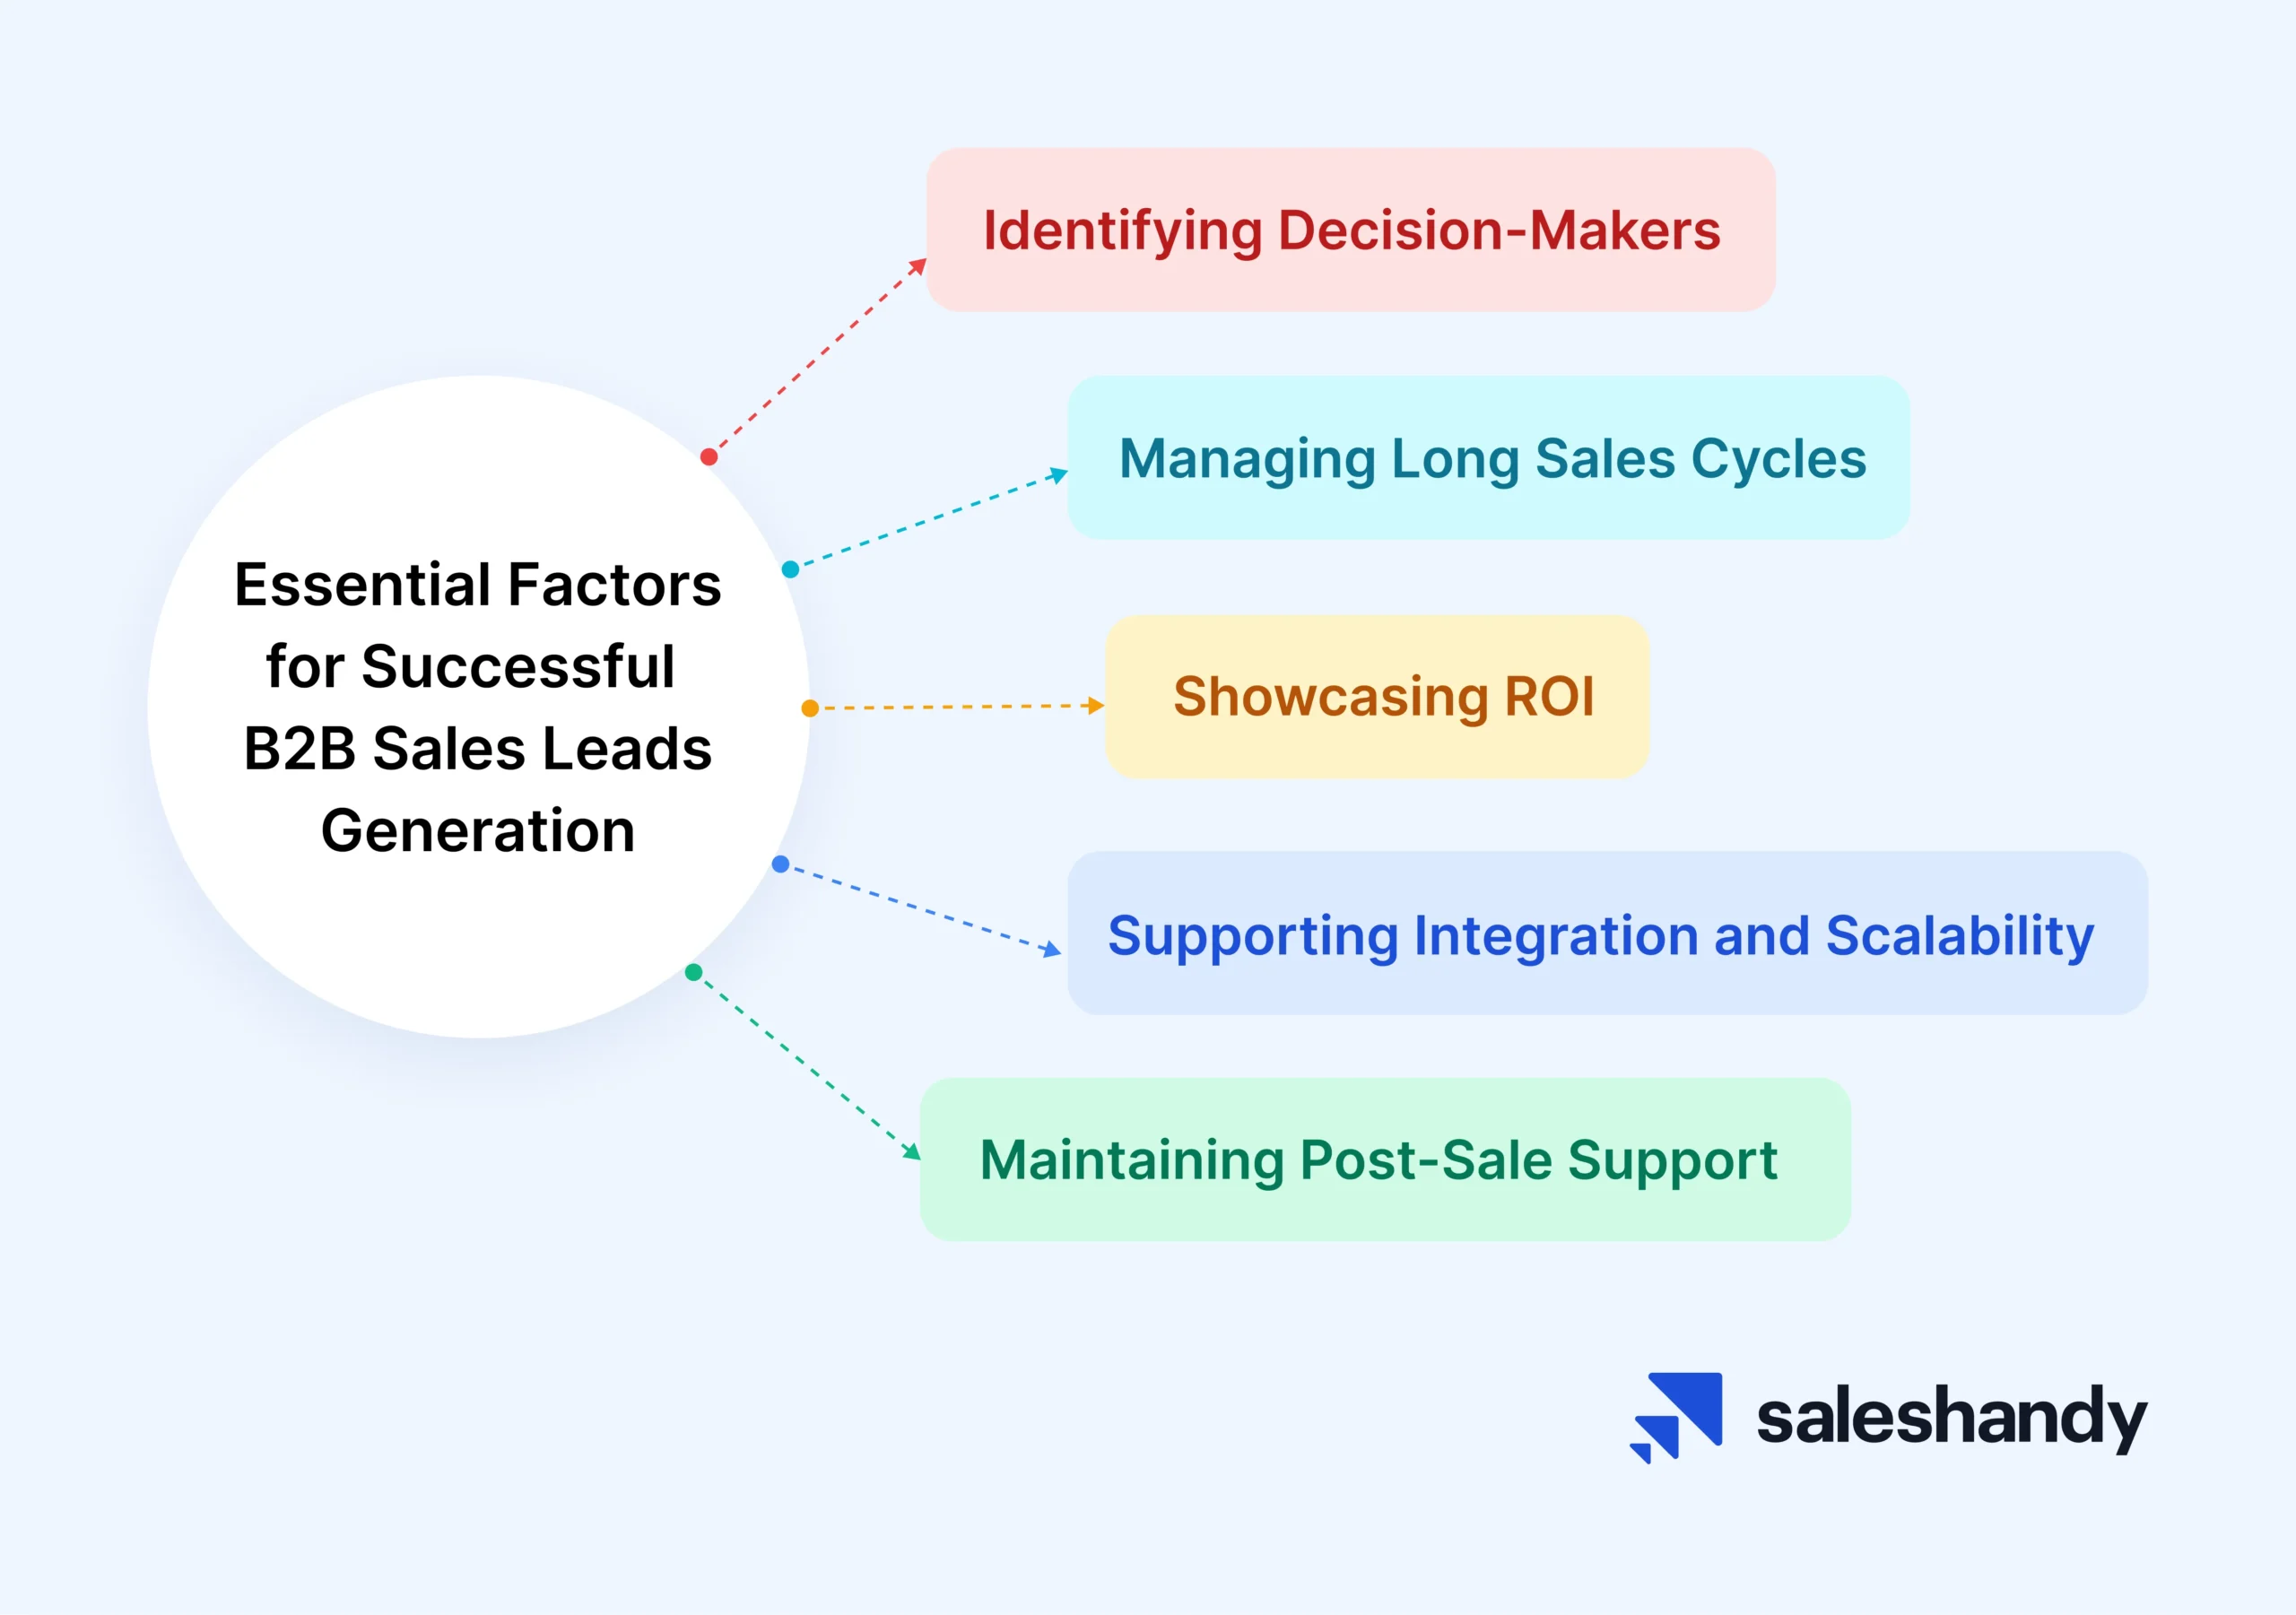 The essential factors you should consider to successfully generate B2B sales leads.